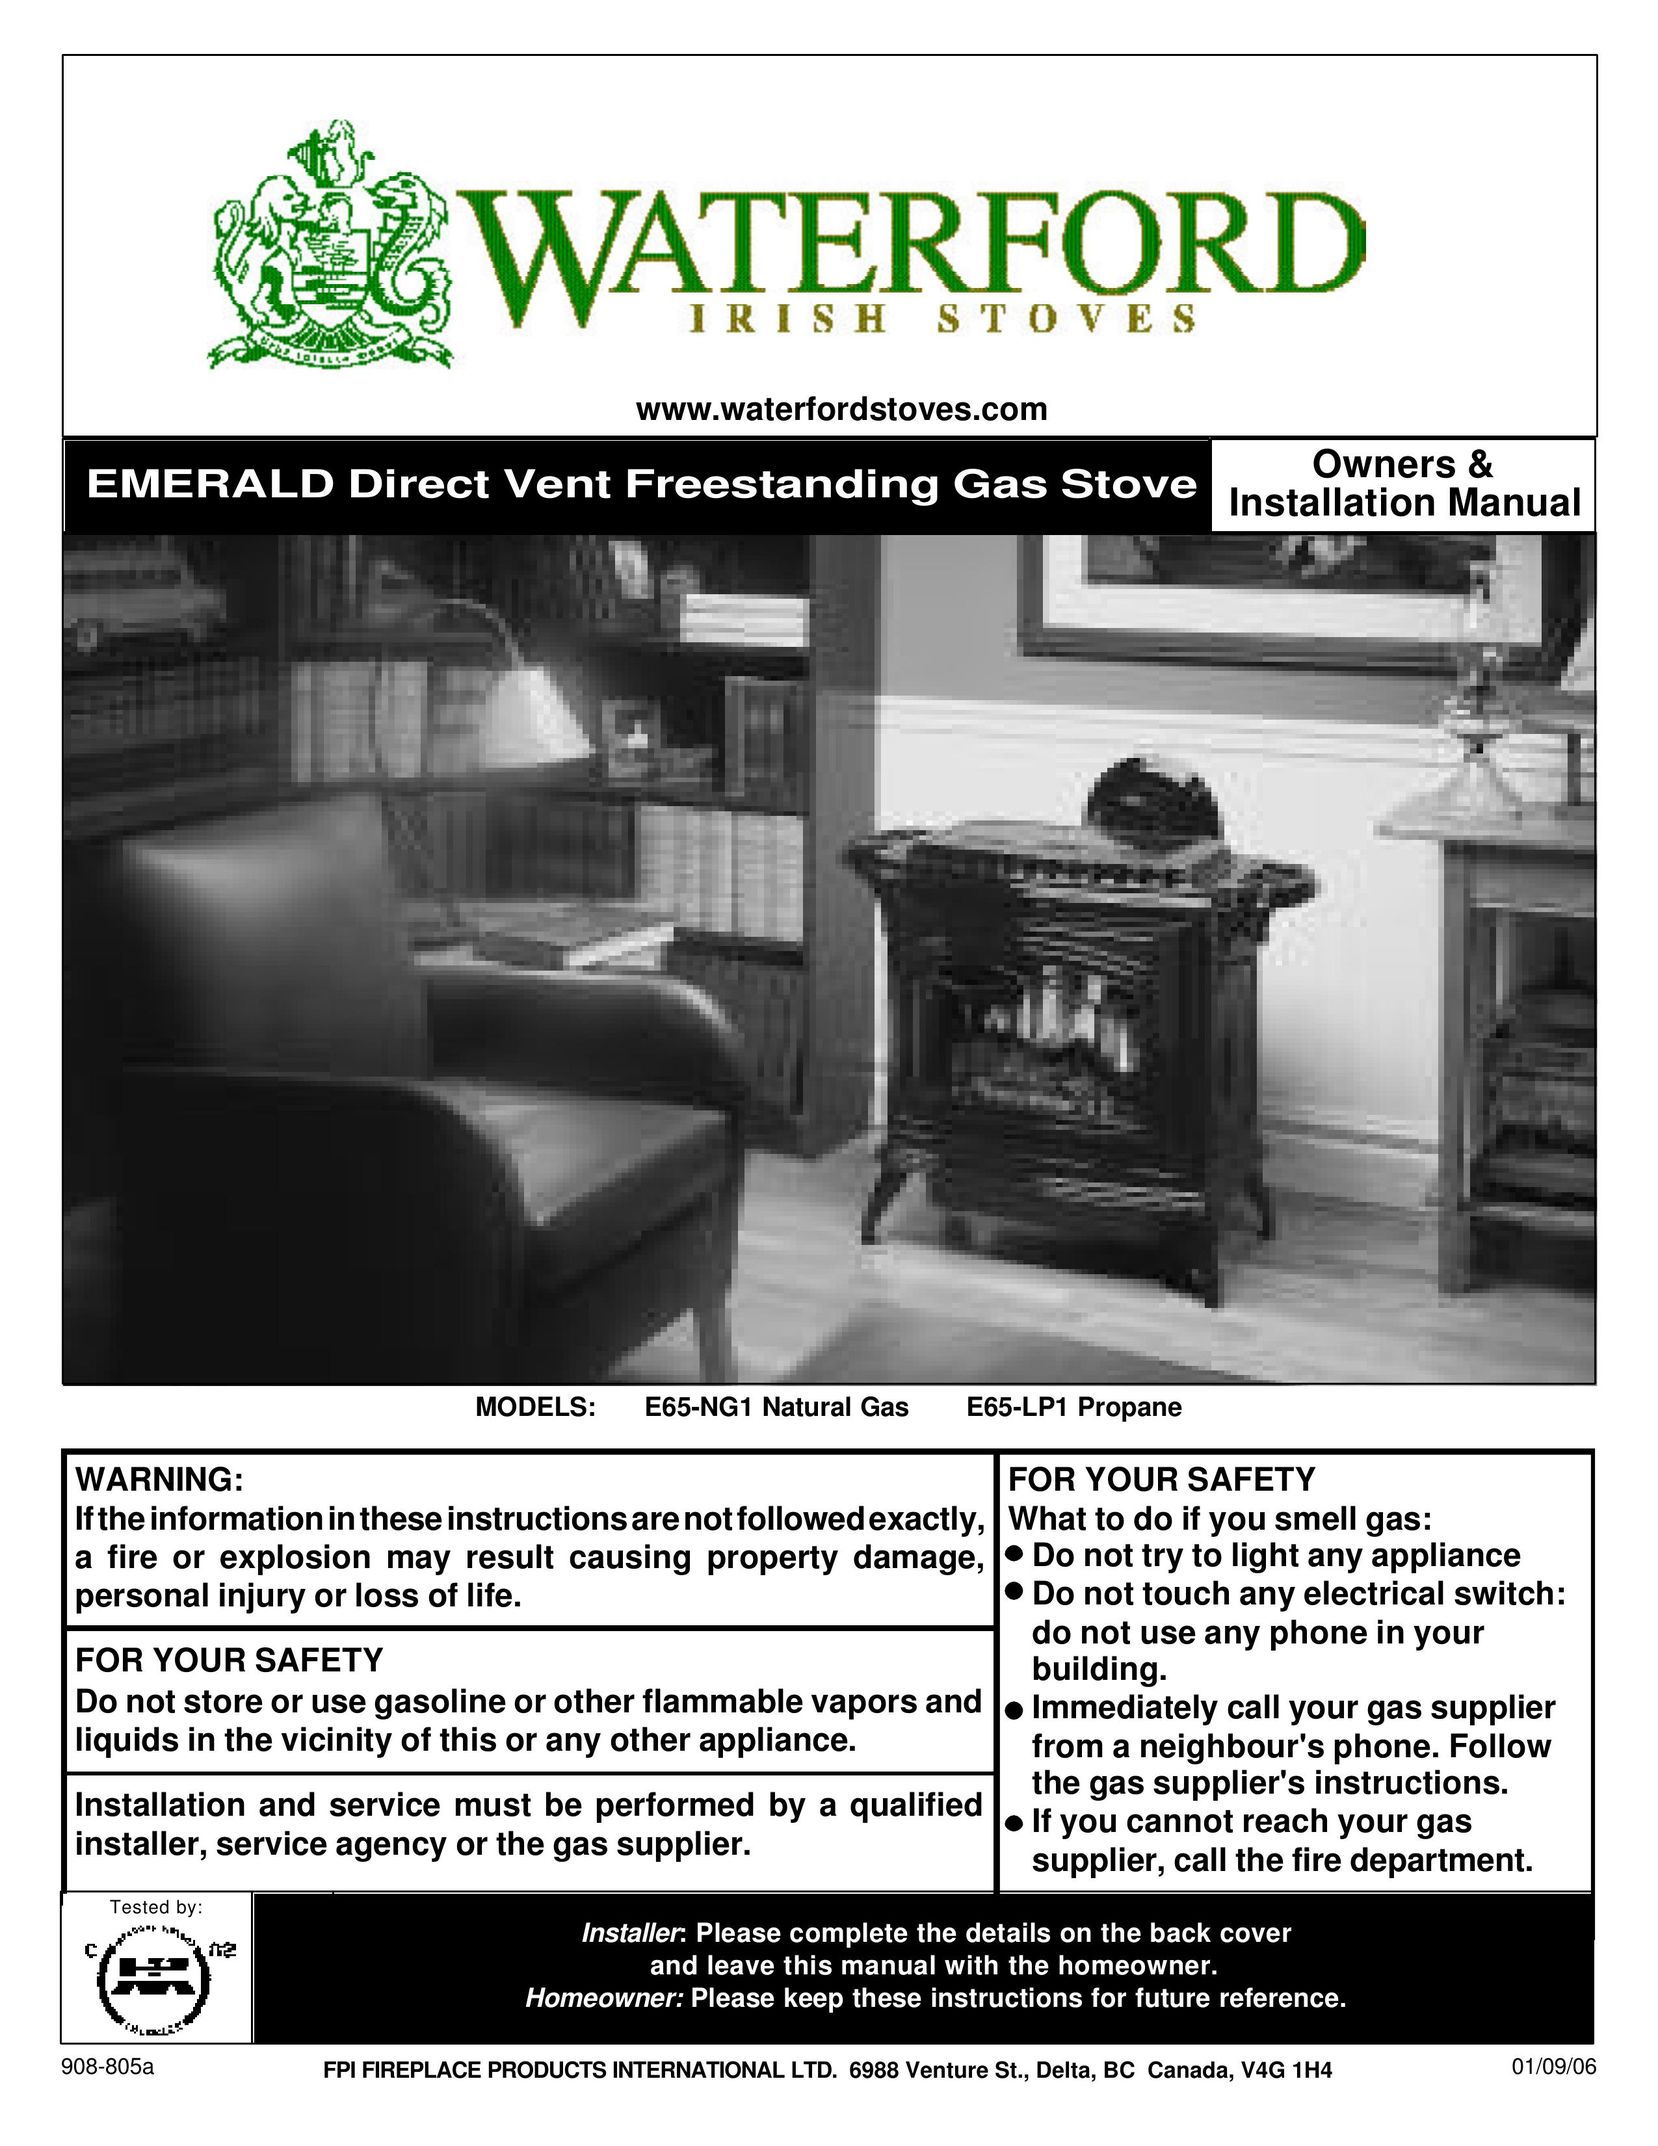 Waterford Appliances E65-LP1 Stove User Manual